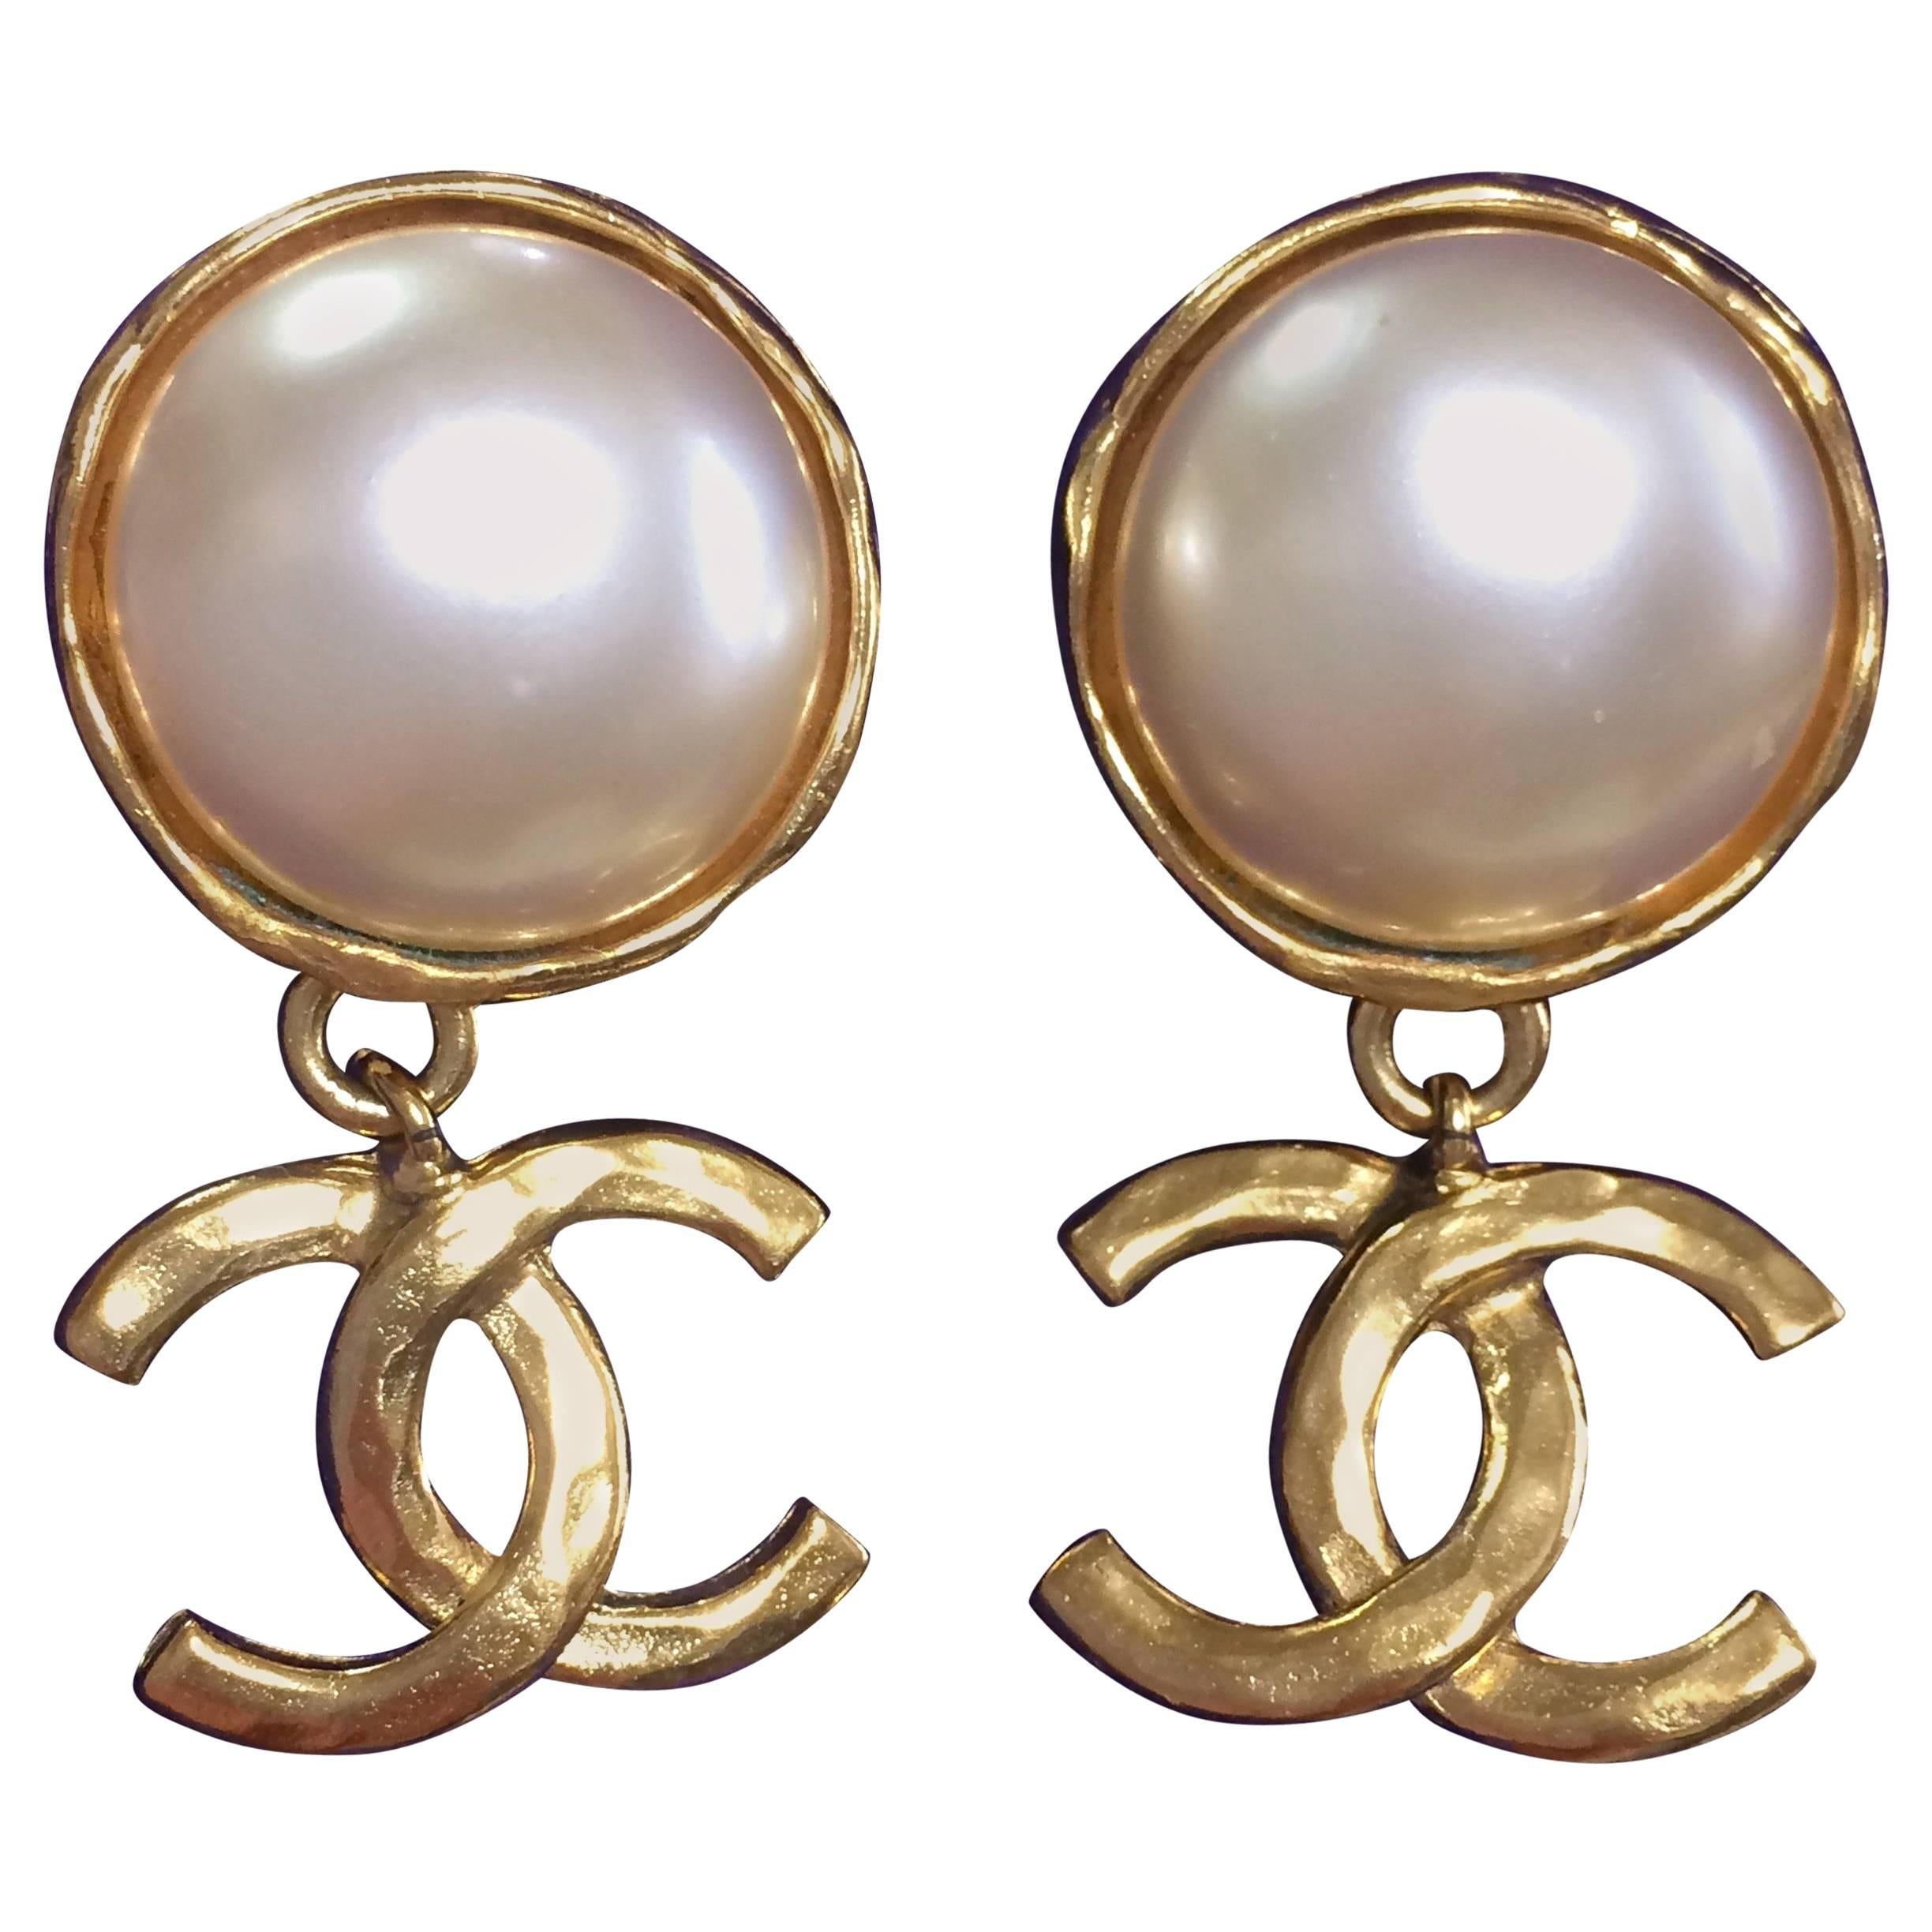 Vintage CHANEL classic round white faux pearl and golden CC dangling earrings. 